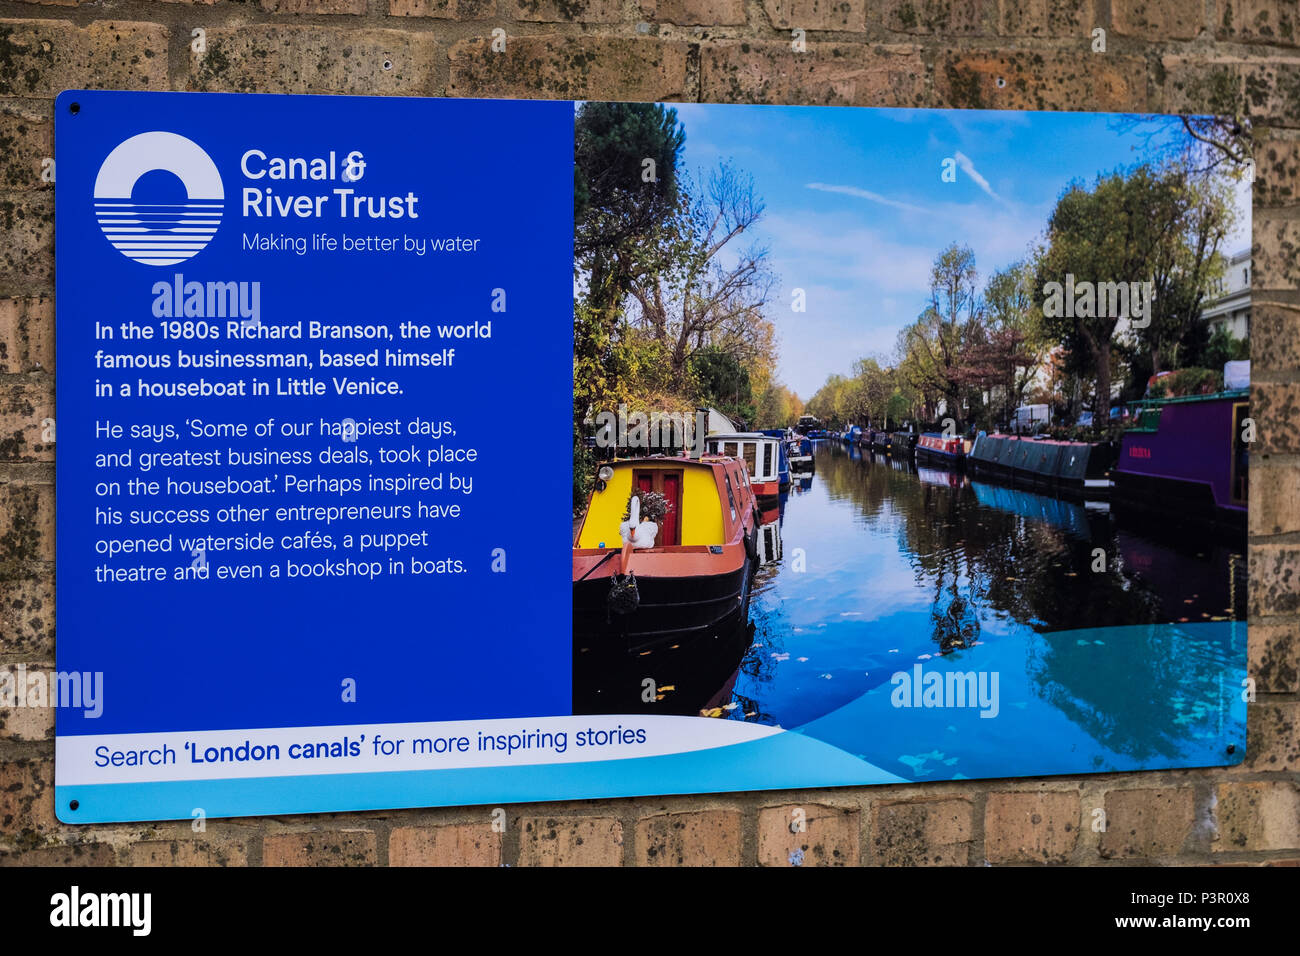 Canal & River Trust sign at Little Venice, London, England, U.K. Stock Photo